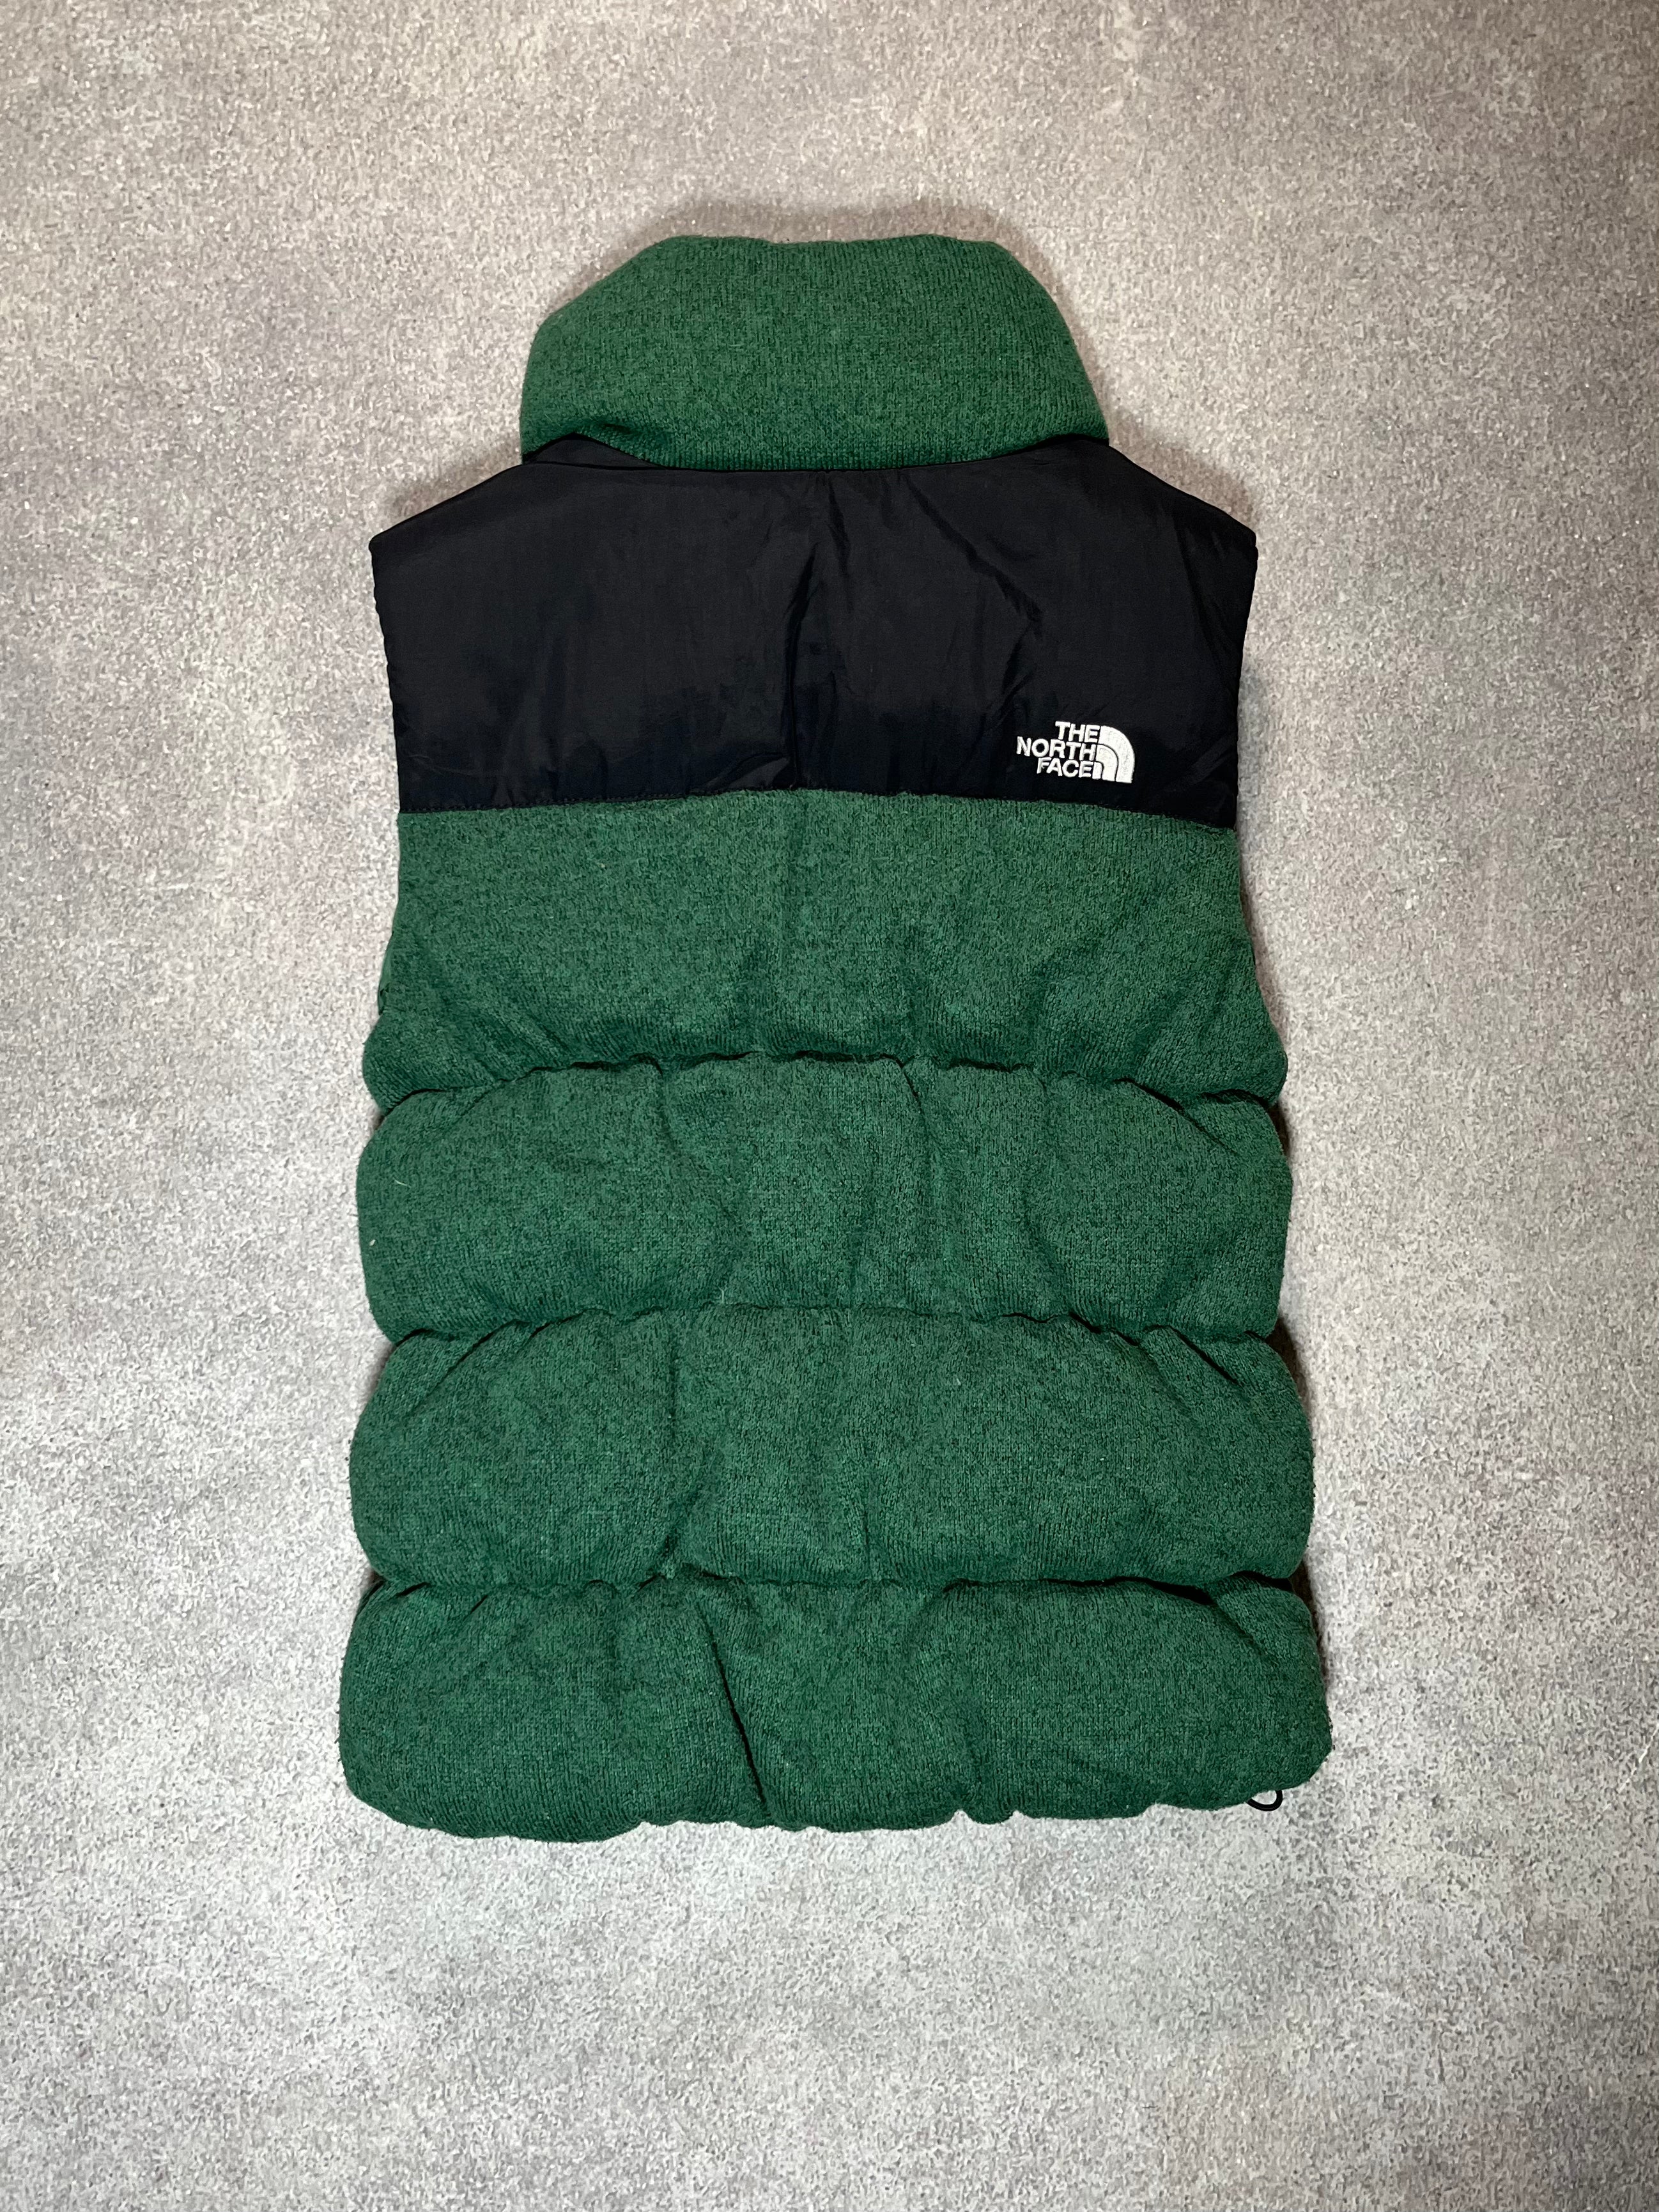 The North Face 700 Puffer Vest Green // Small - RHAGHOUSE VINTAGE